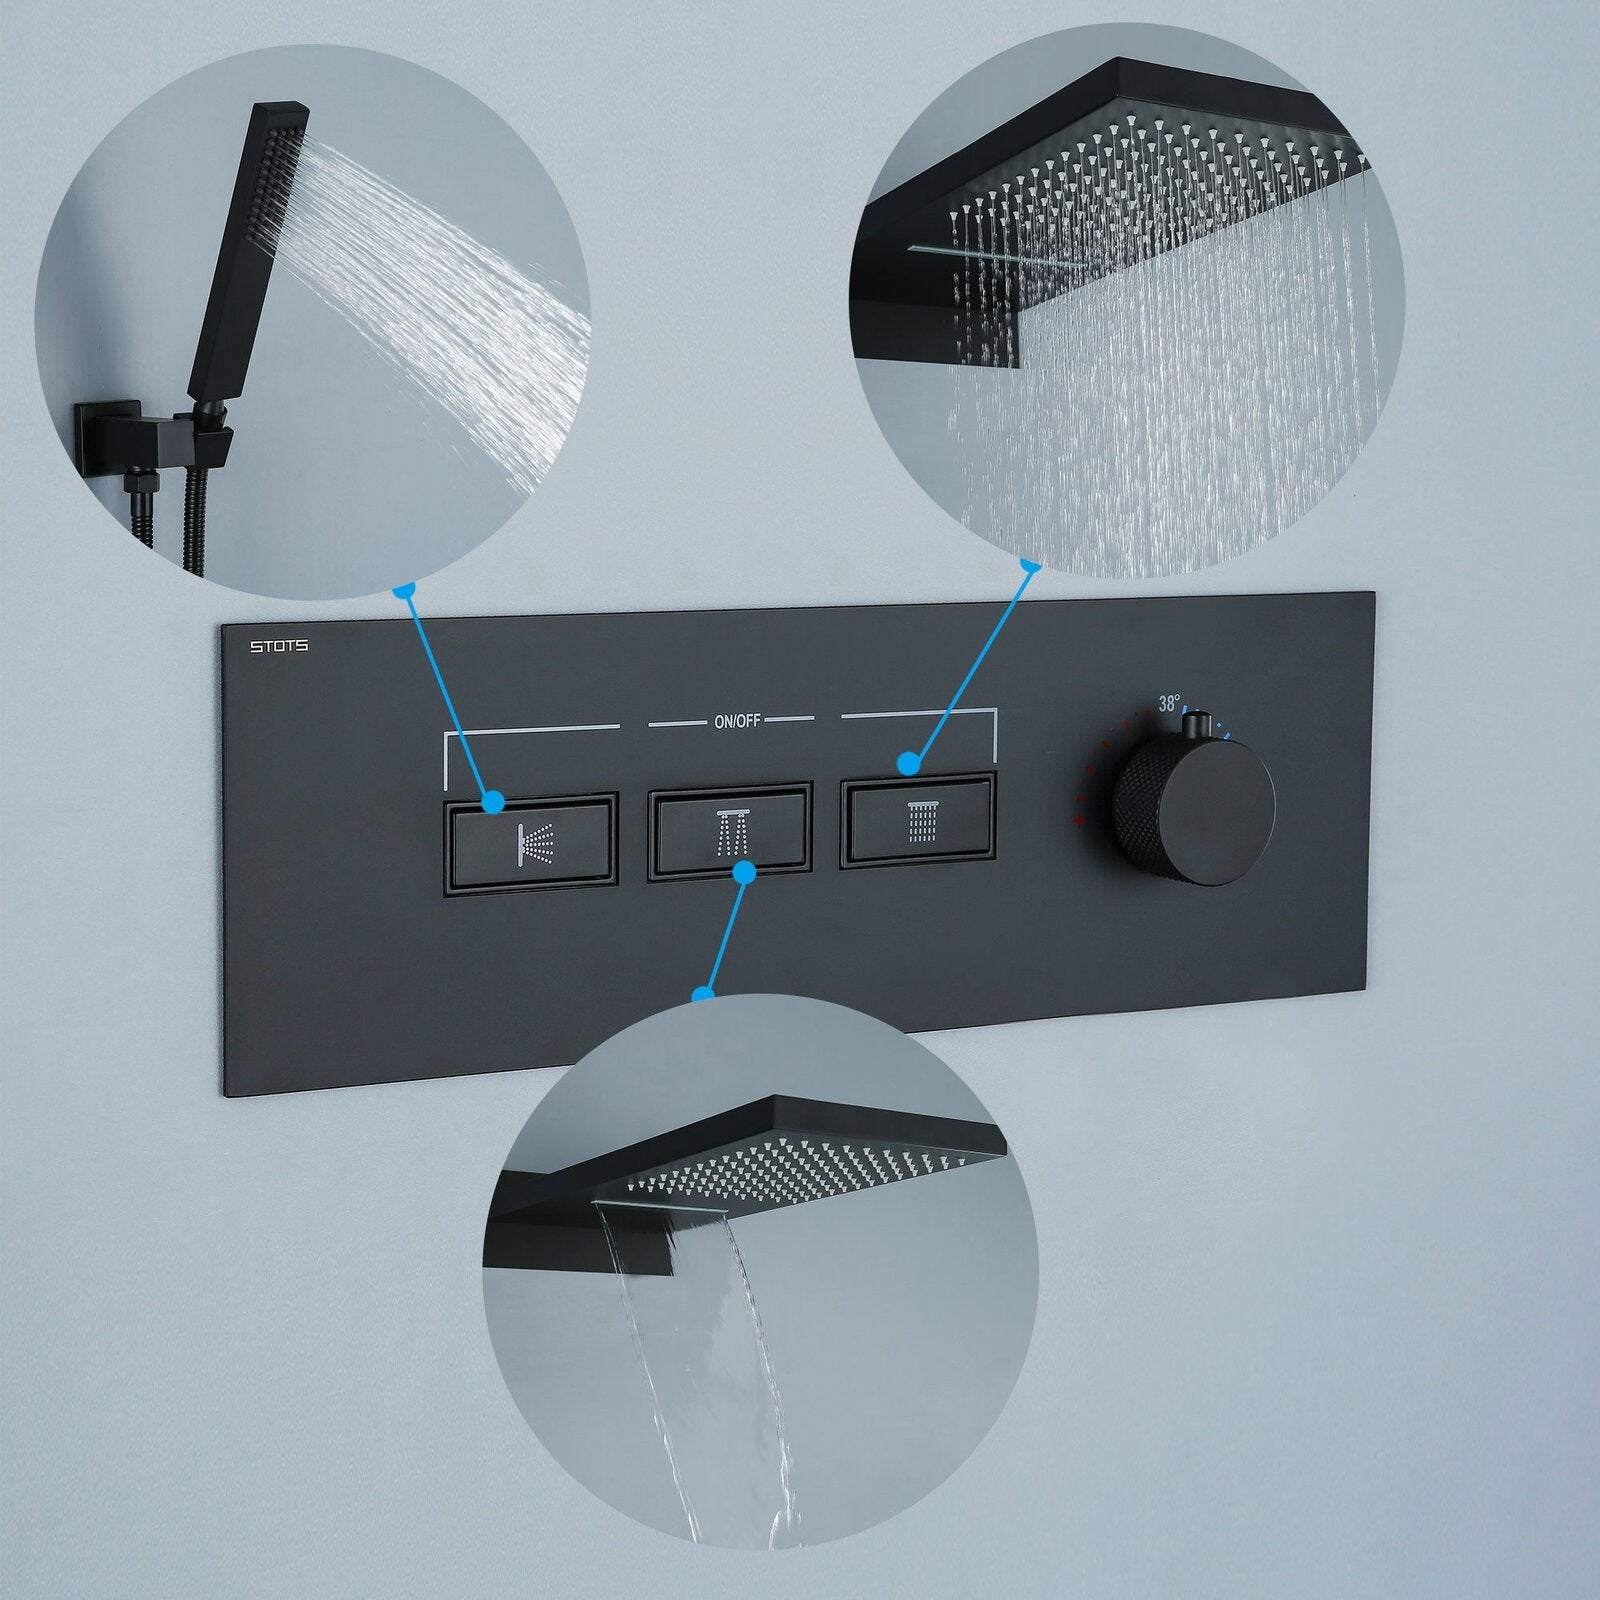 Foni Thermostatic Rainfall & Waterfall Combo Shower System in Matte Black